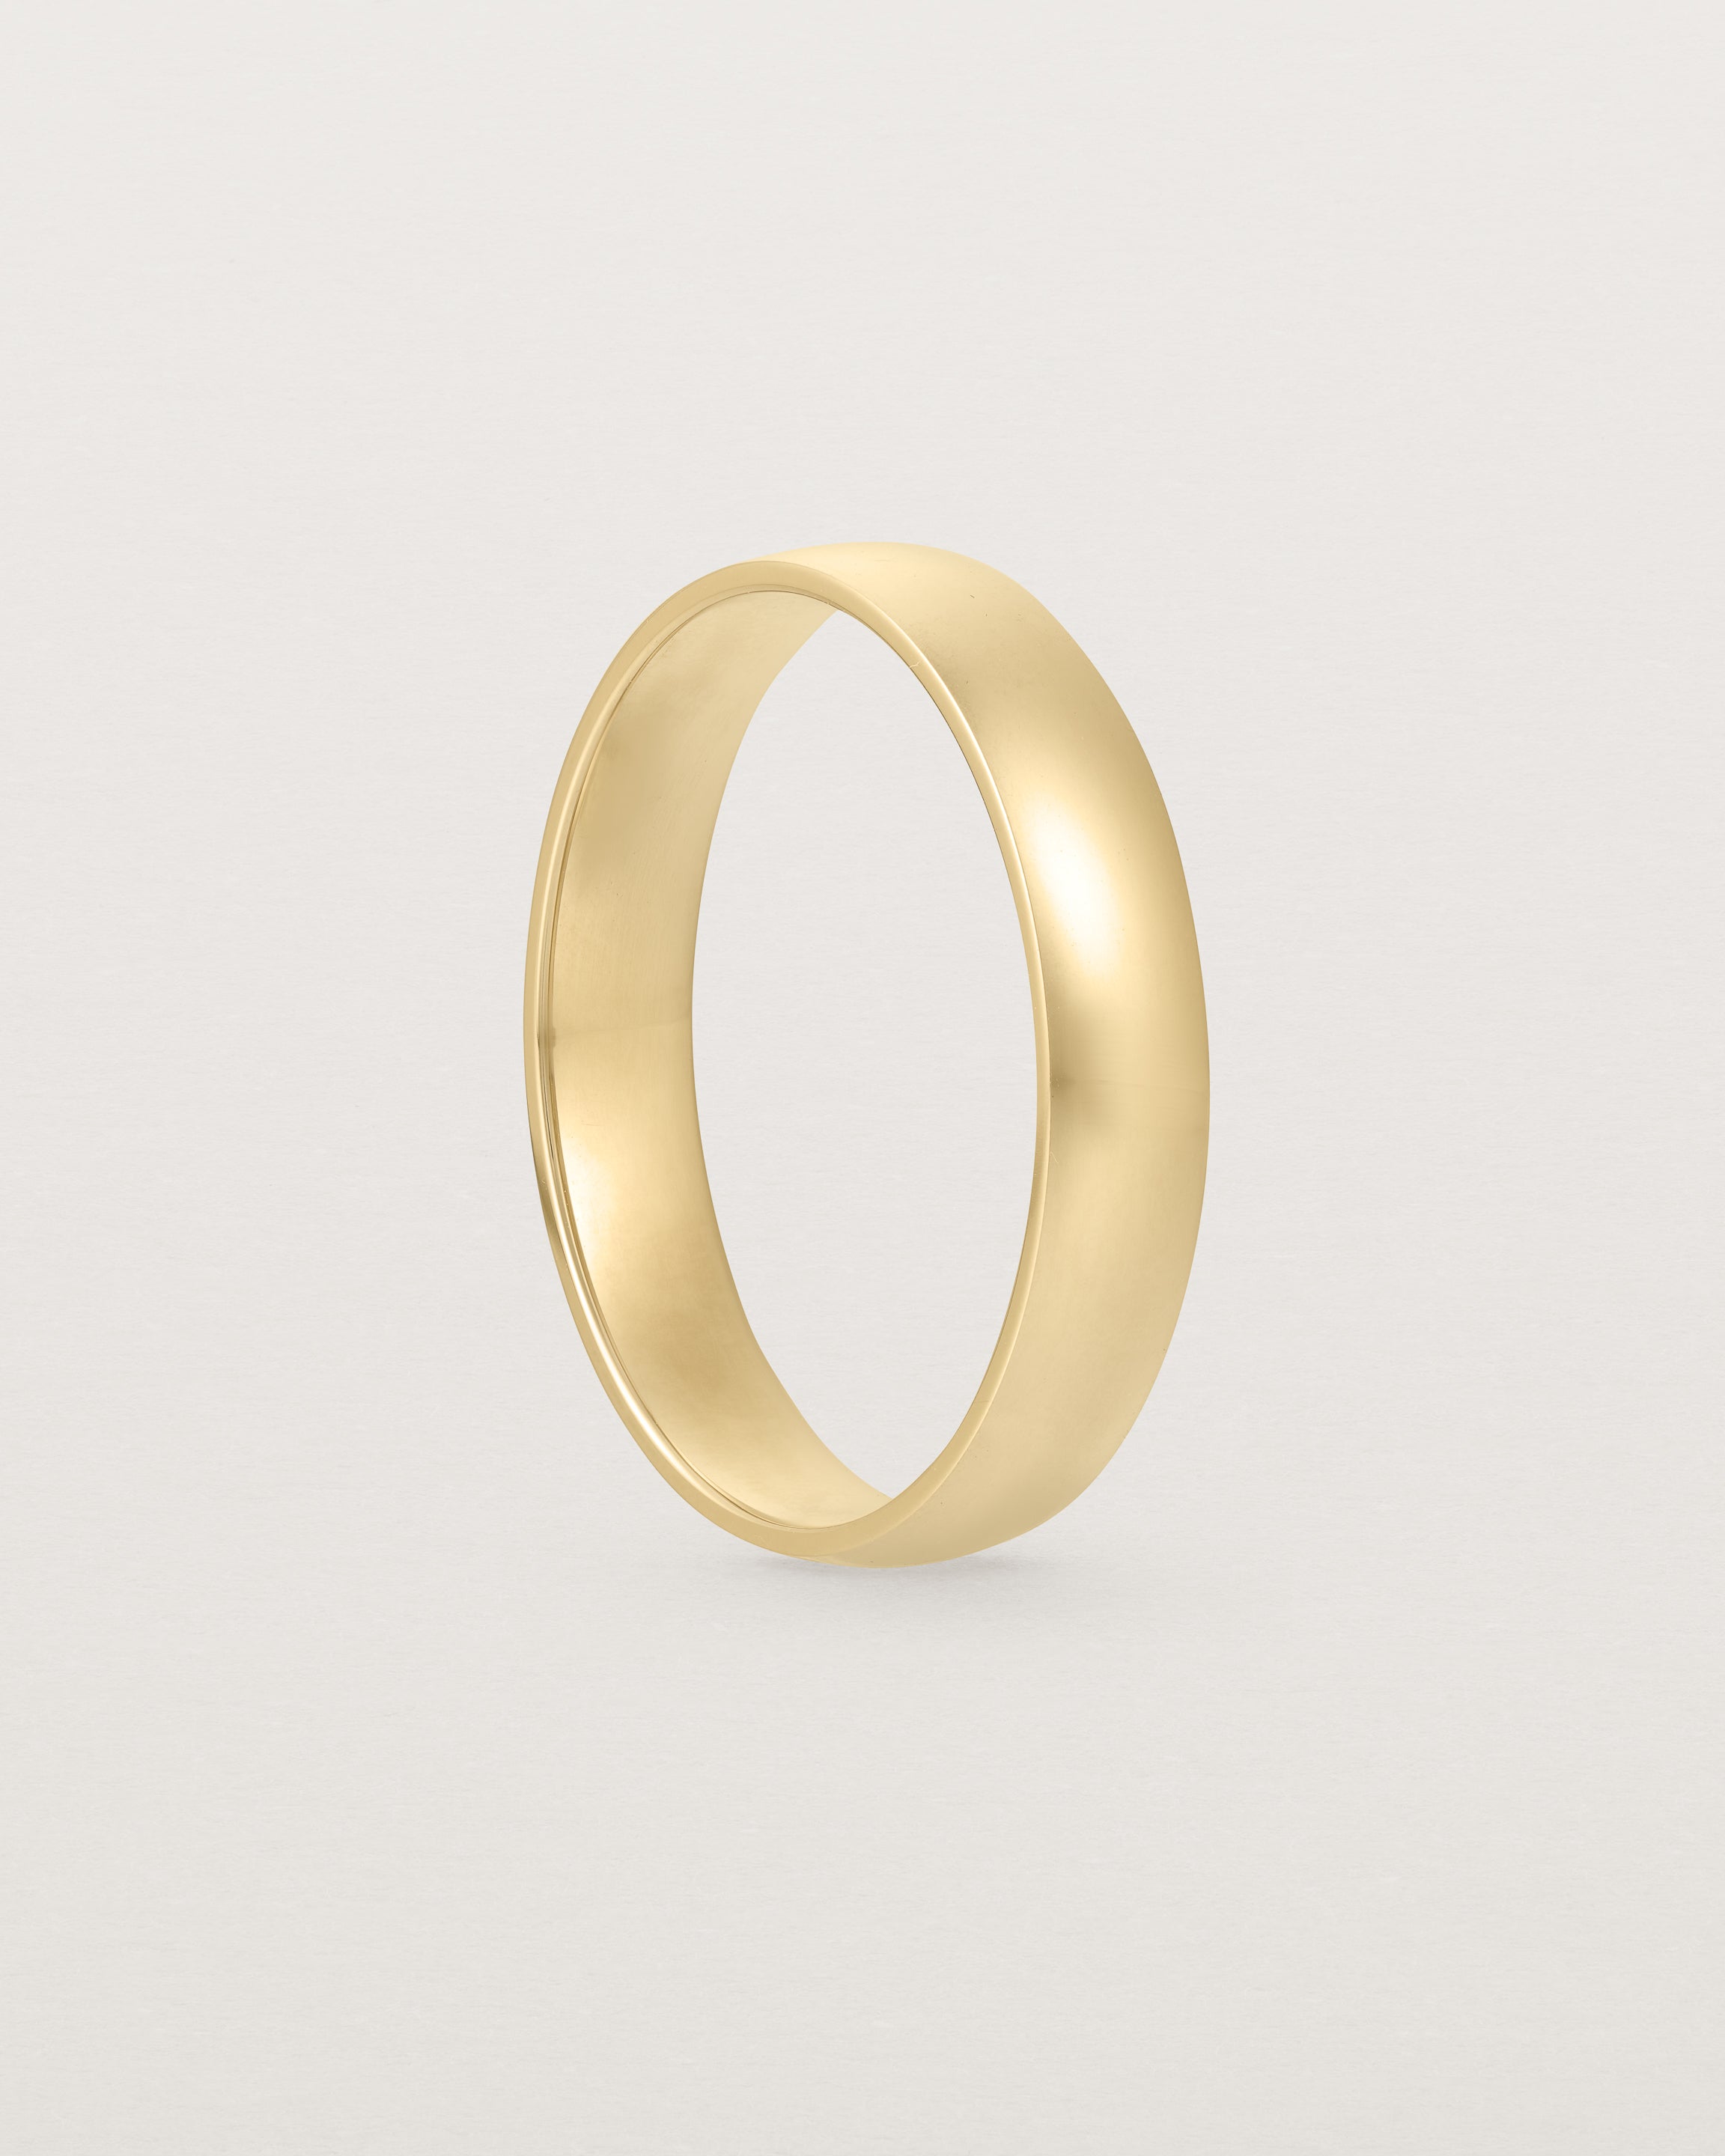 A classic 4mm wedding band crafted in yellow gold